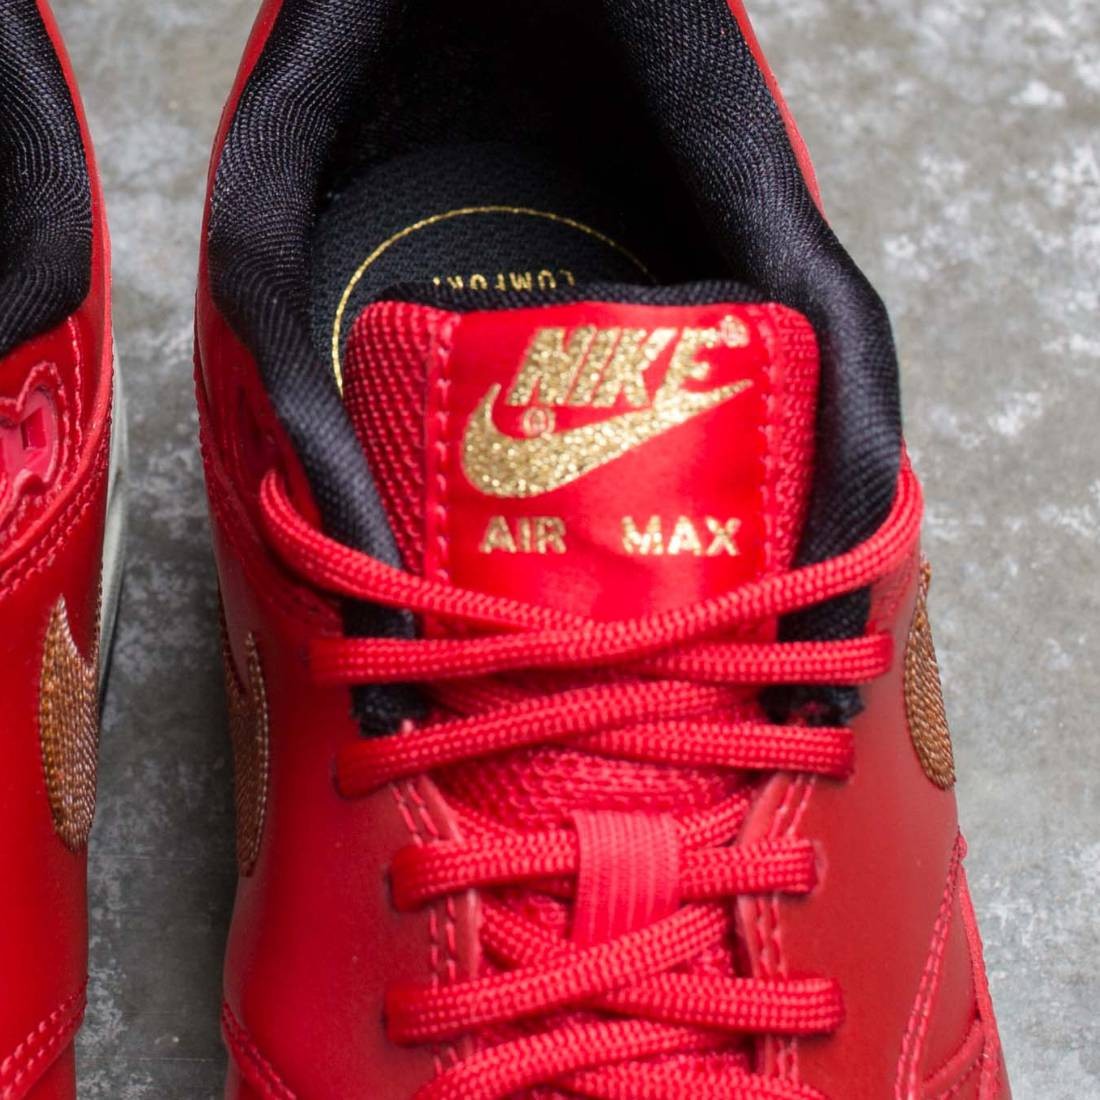 gold black and red air max